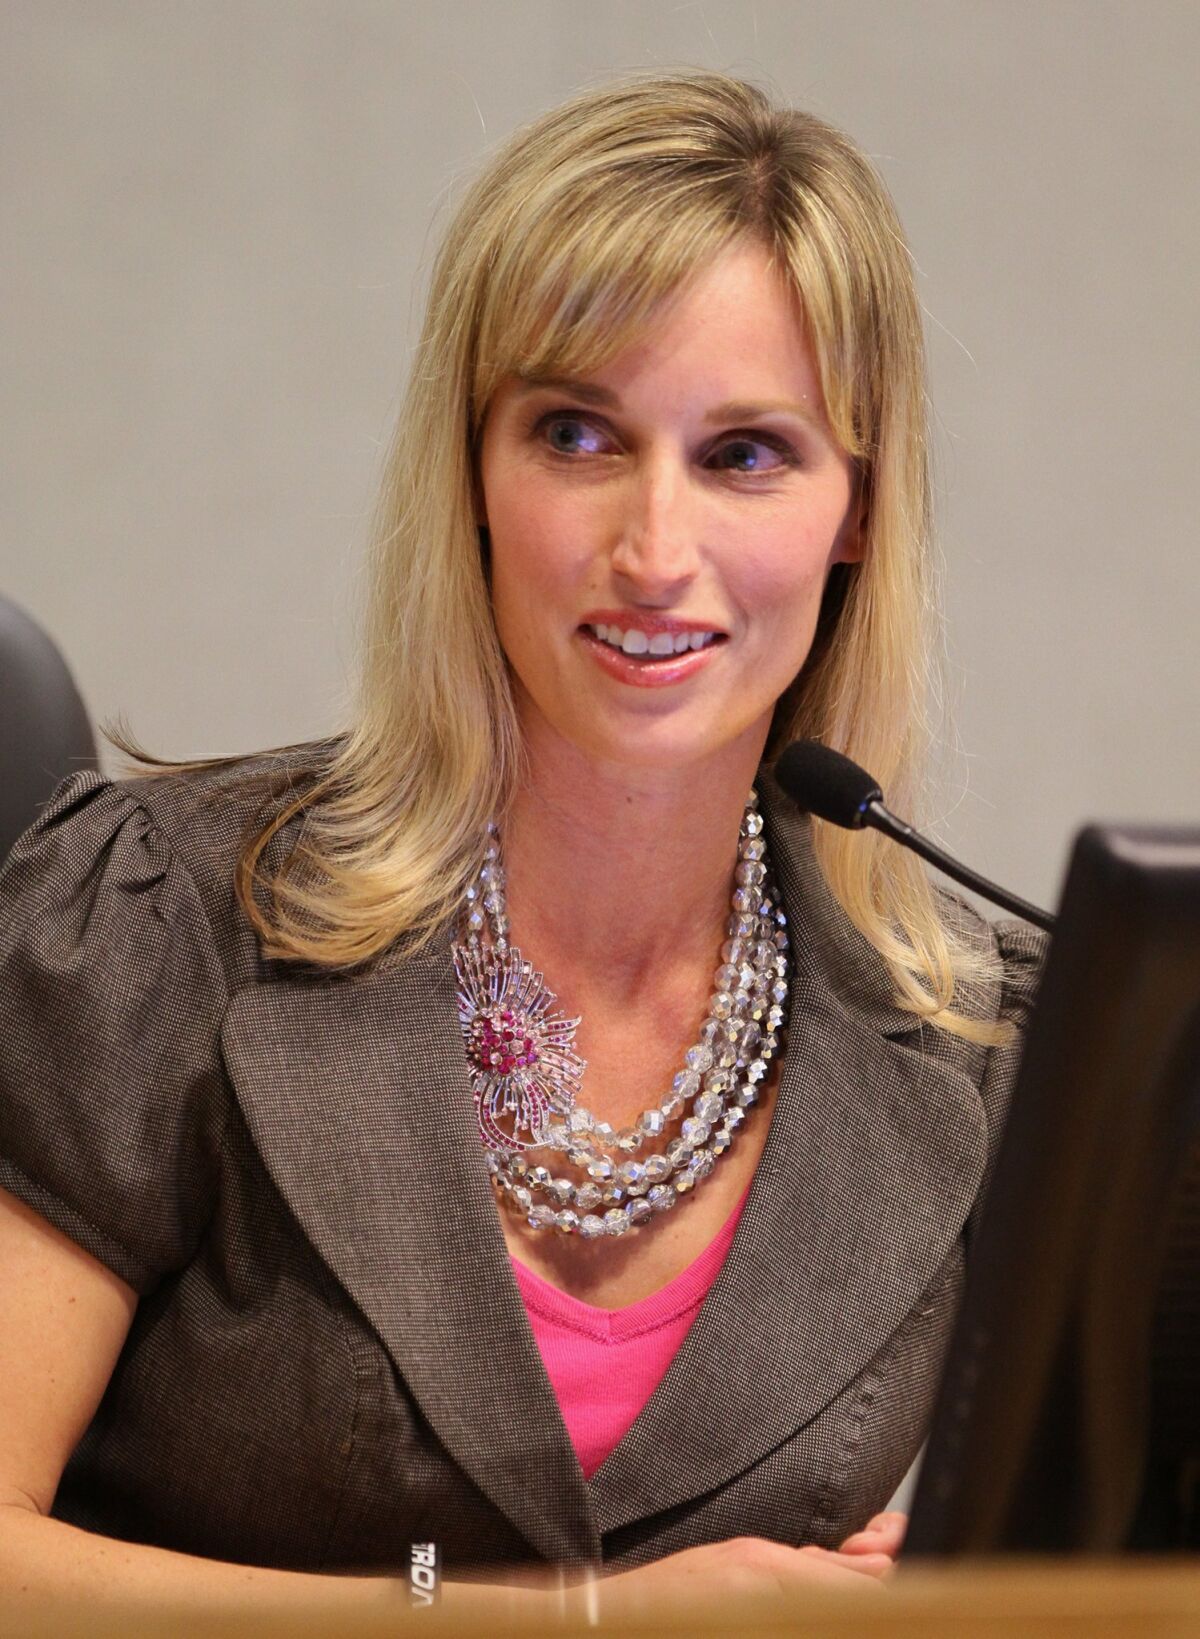 File photo of county Supervisor Kristin Gaspar, whose grants have come under review by local activists.